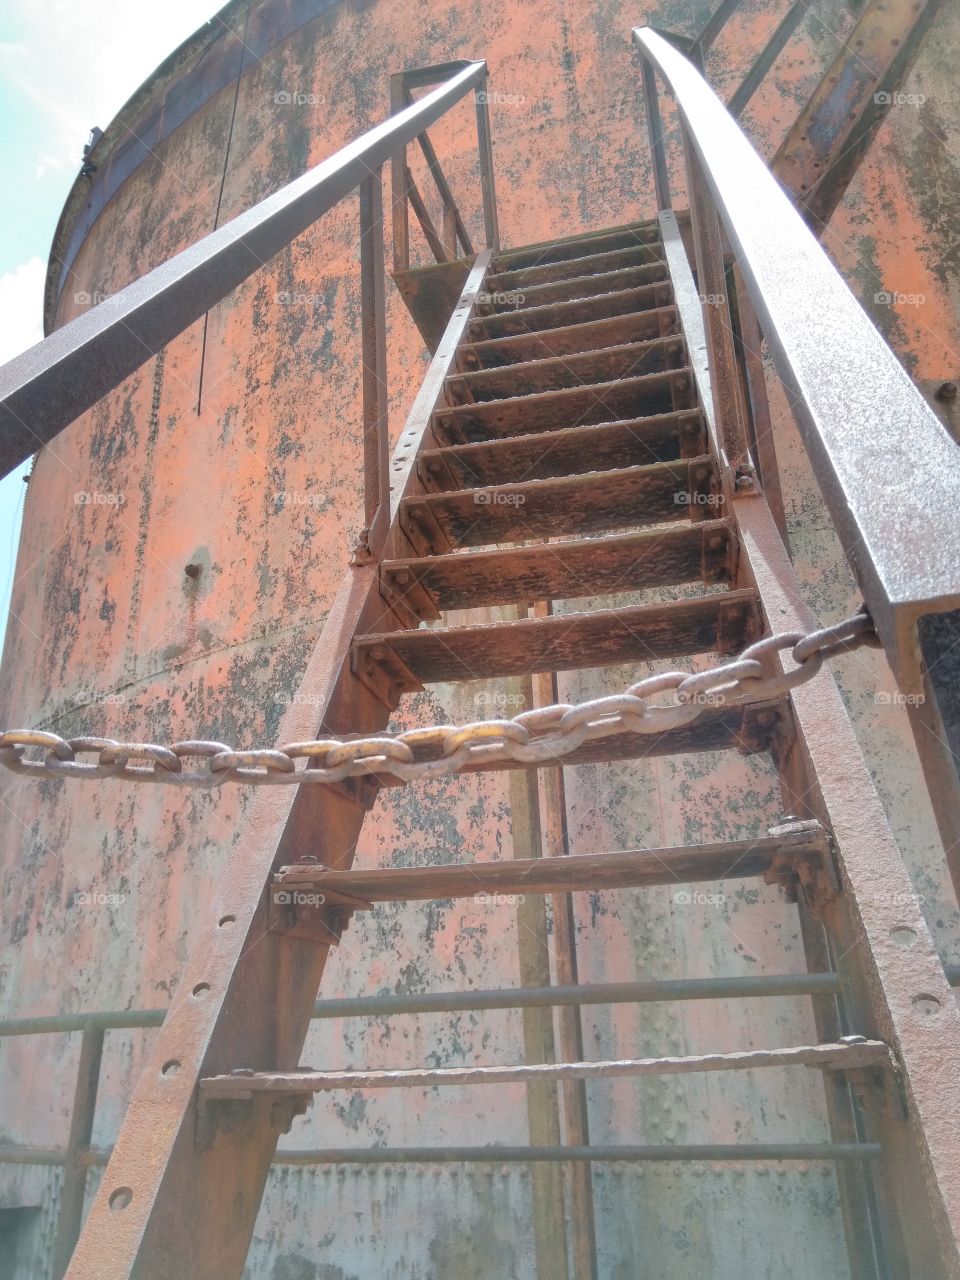 stairway to heaven? more like the stairway to silent hill.